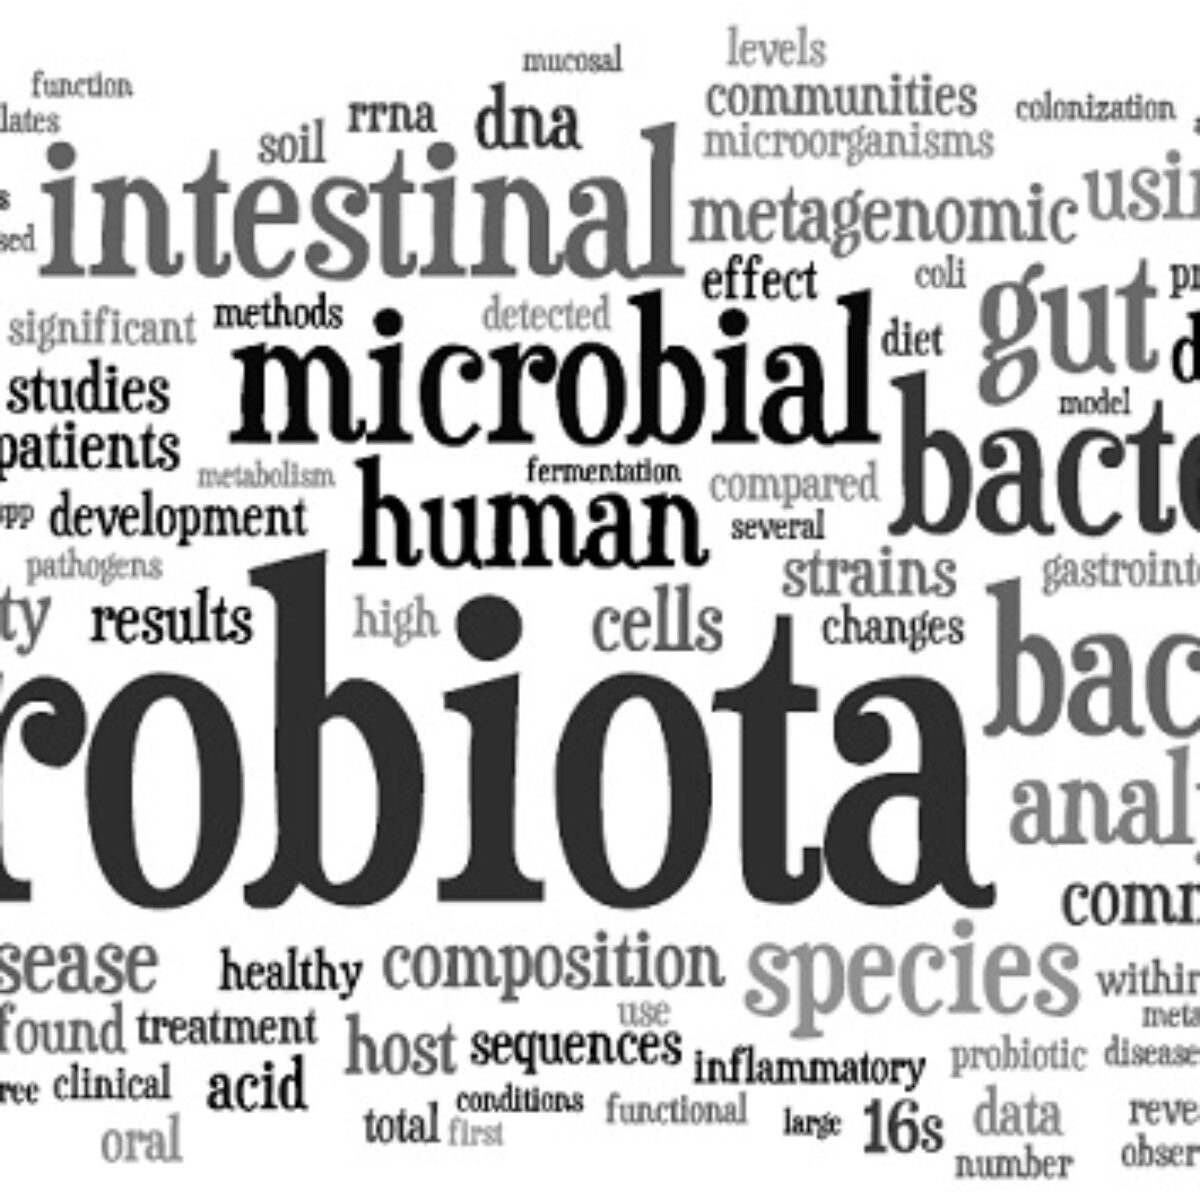 A decades of metagenomics approach based studies wordle